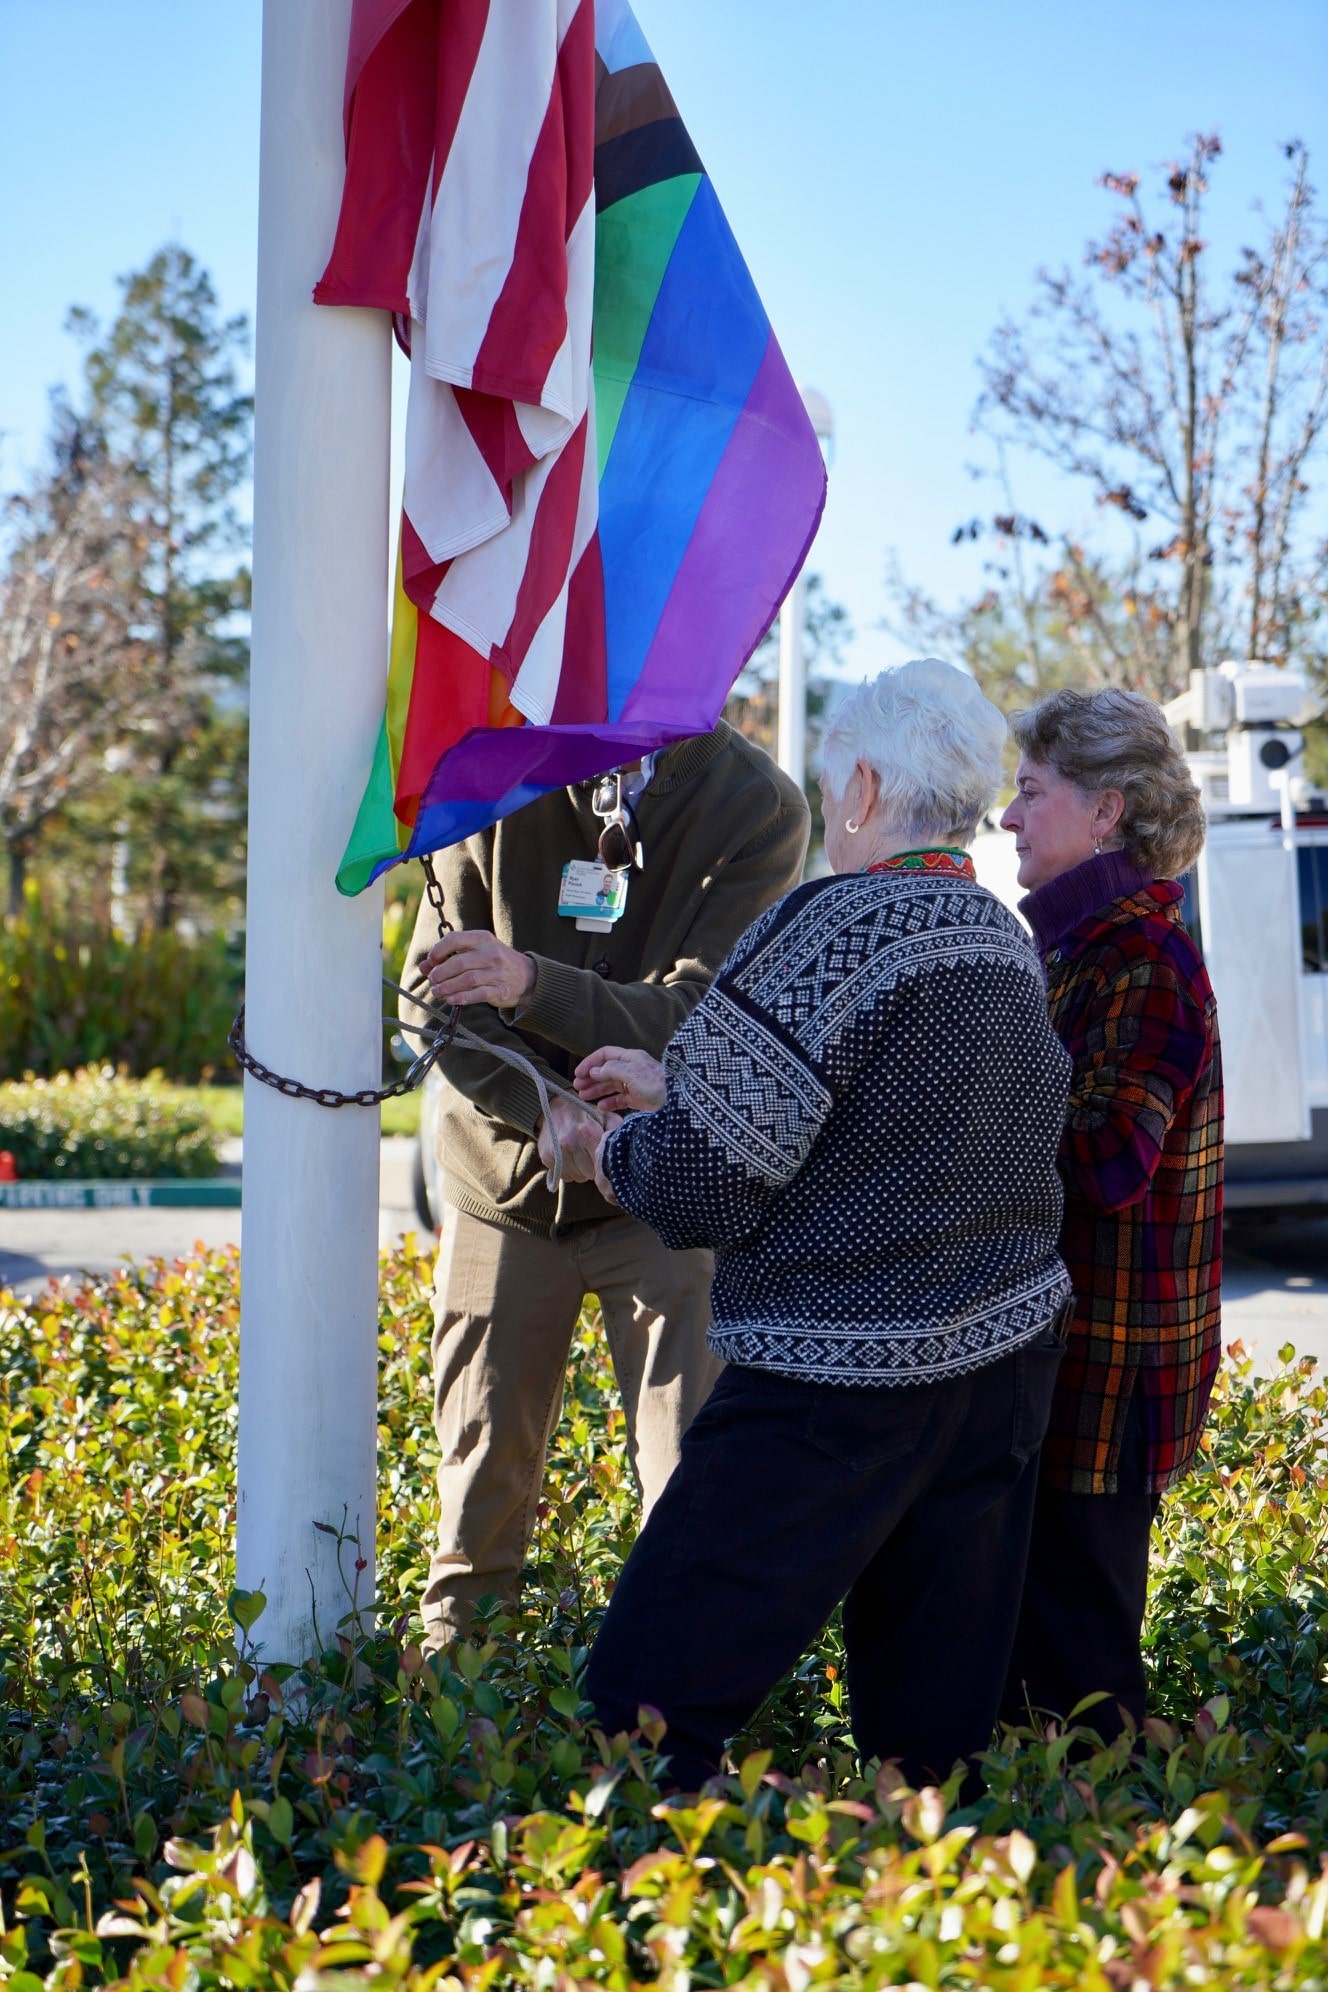 Former Sutter patients Beth Reed and Lolma Olson work alongside a gentleman to hoist up a new rainbow flag underneath the American flag at Novato Community Hospital.